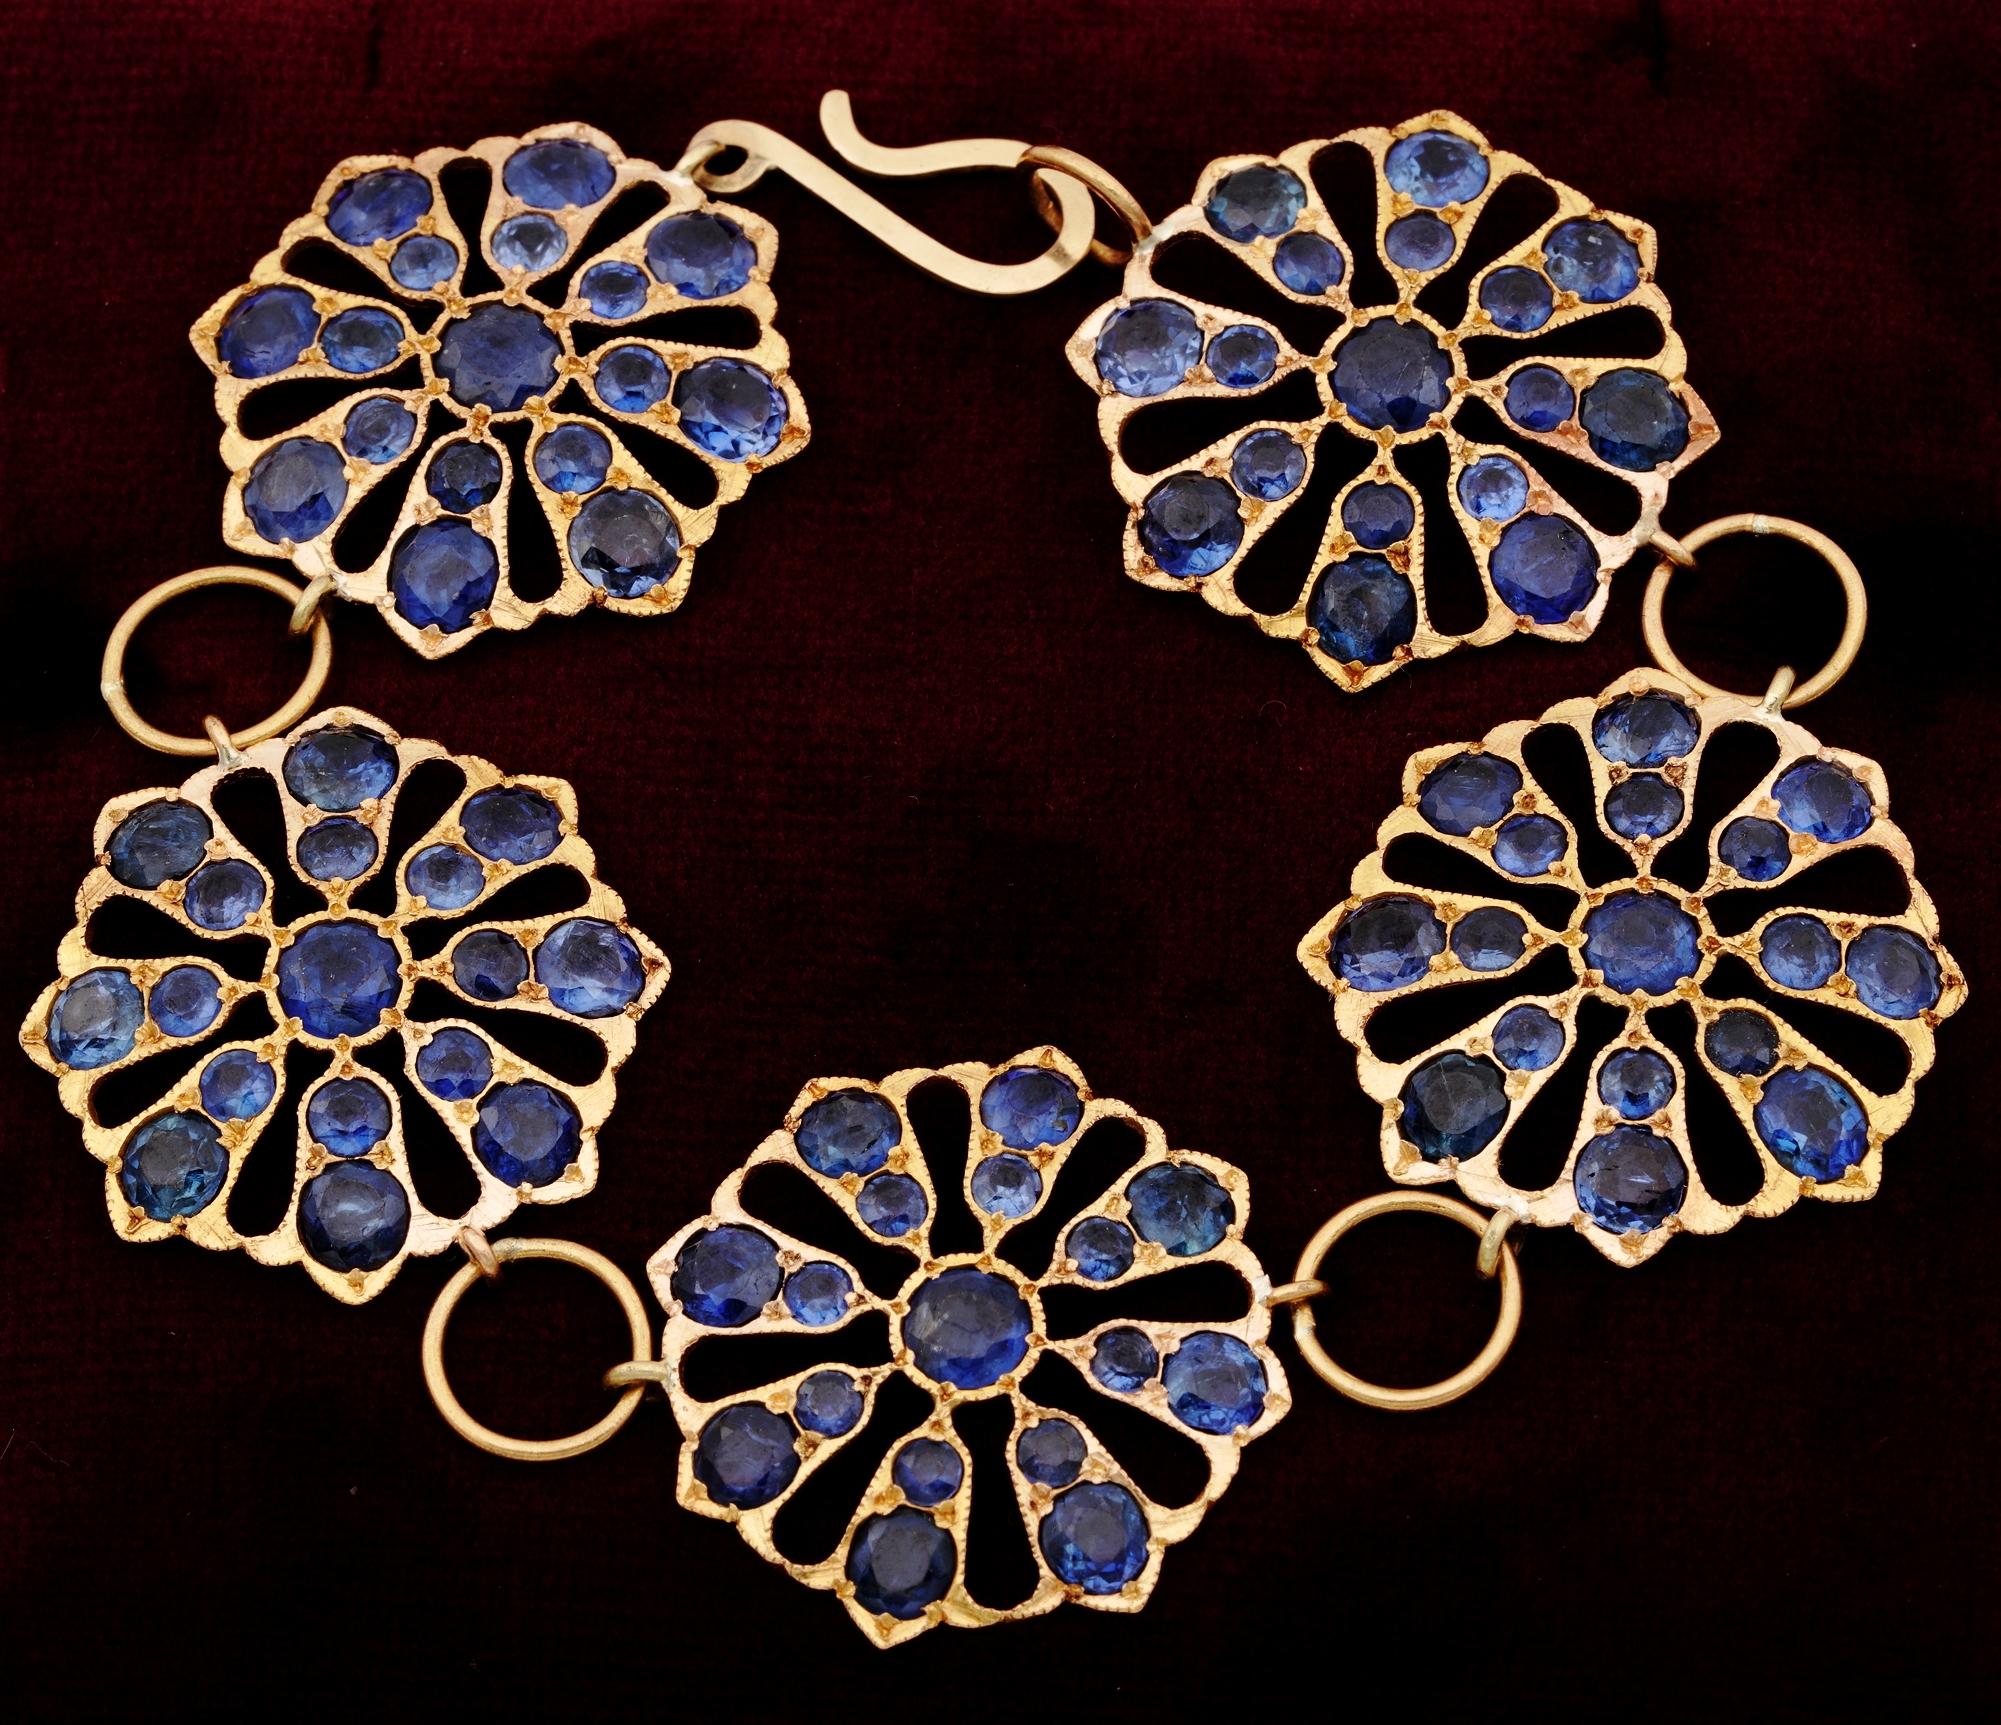 This is so Beautiful!

Please find for sale this truly fabulous find
A sensational original Victorian stepping back to 1890 ca, rare lacy flower work, overwhelmed by old cut Natural NO HEAT Ceylon Sapphire
Forming a magical effect between the